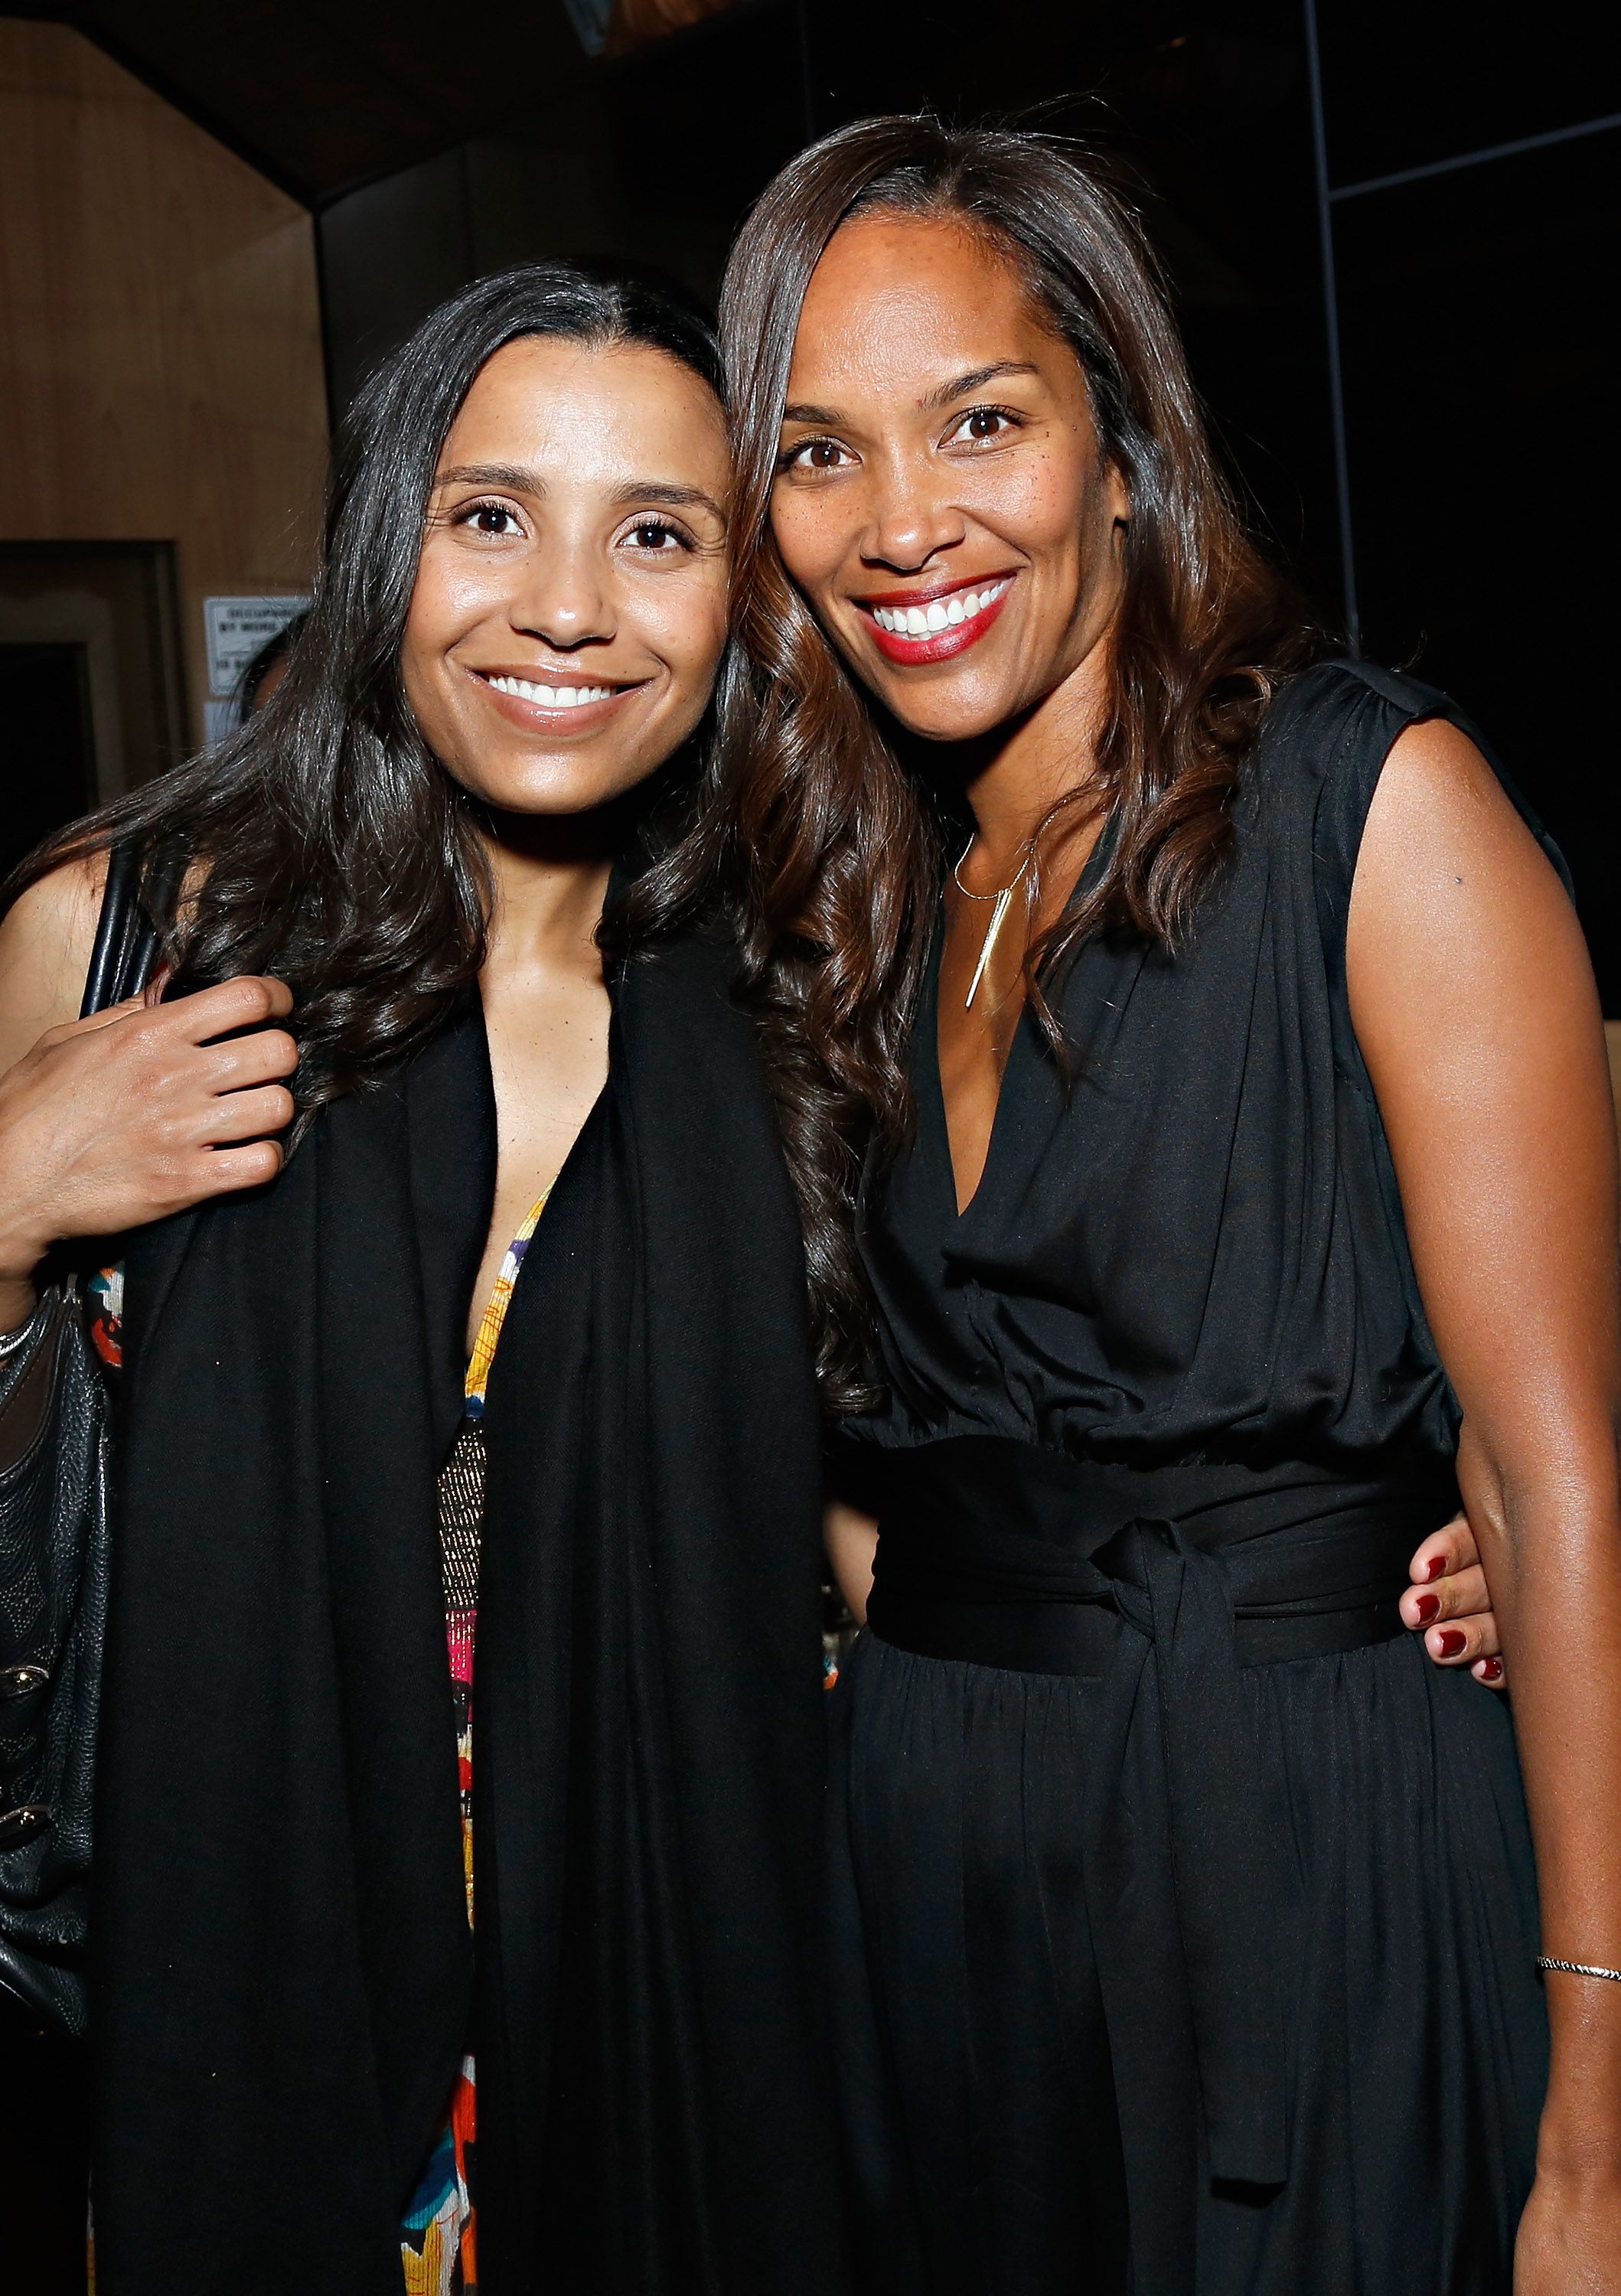 Marilee Fiebig and Mara Brock Akil during the 2013 Black Girls Rock Shot Callers Dinner on October 25, 2013, in New York City. | Source: Getty Images